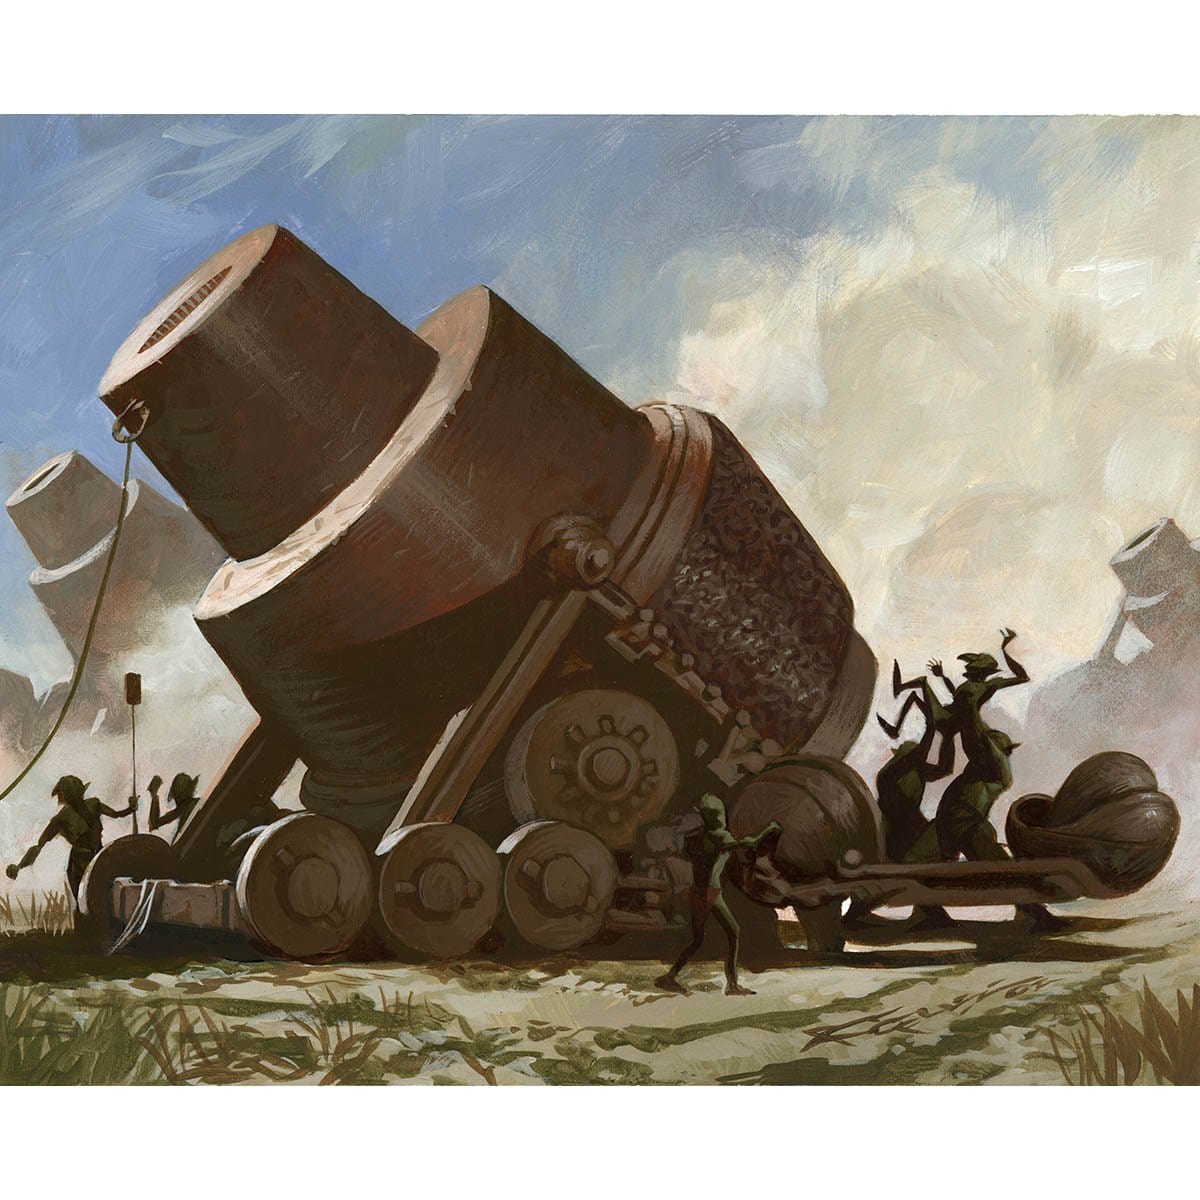 Fodder Cannon Print - Print - Original Magic Art - Accessories for Magic the Gathering and other card games